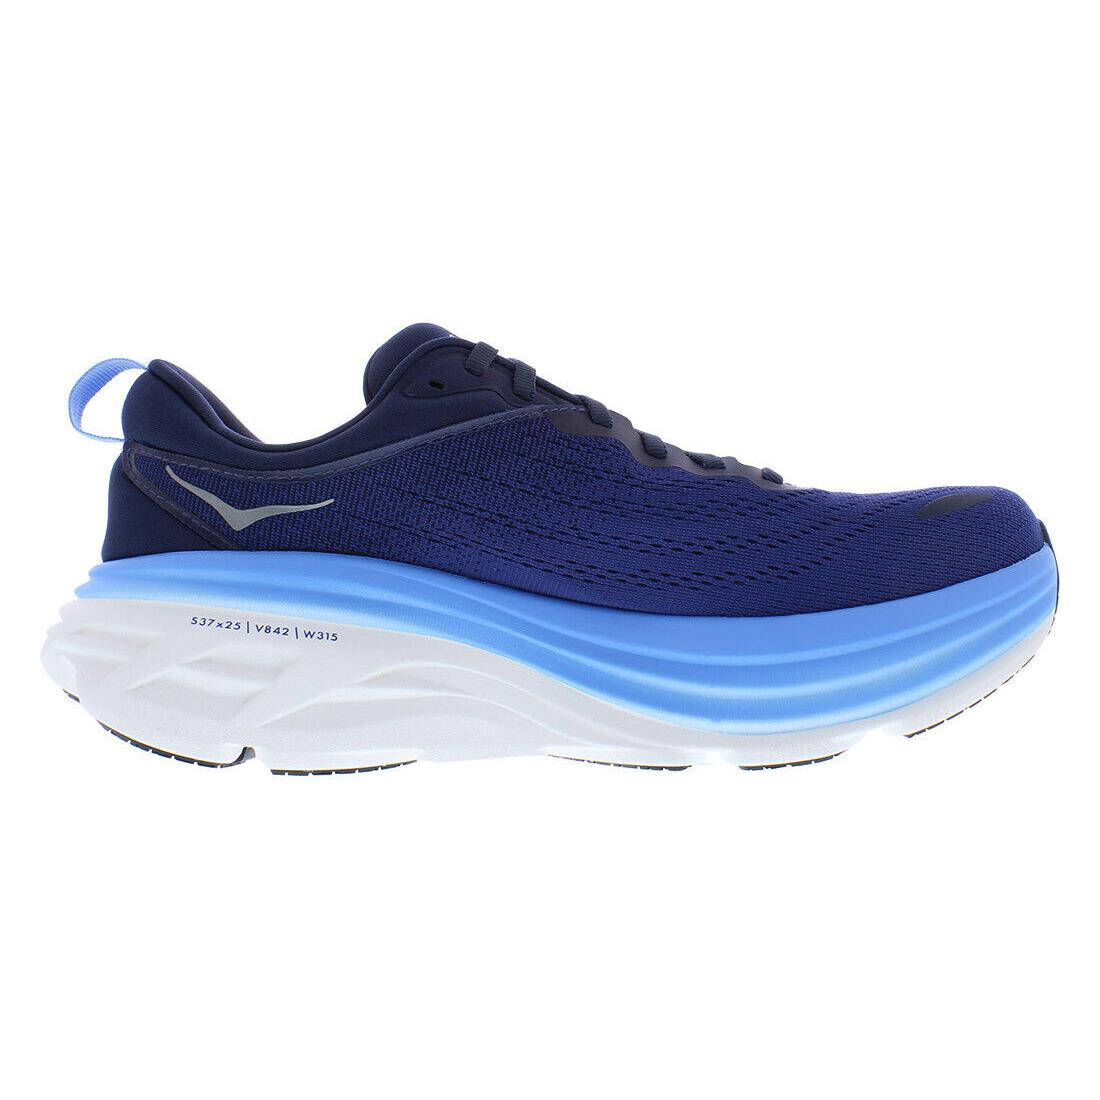 Hoka One One Bondi 8 Mens Shoes Size 9.5 Color: Outer Space/all Aboard - Blue, Full: